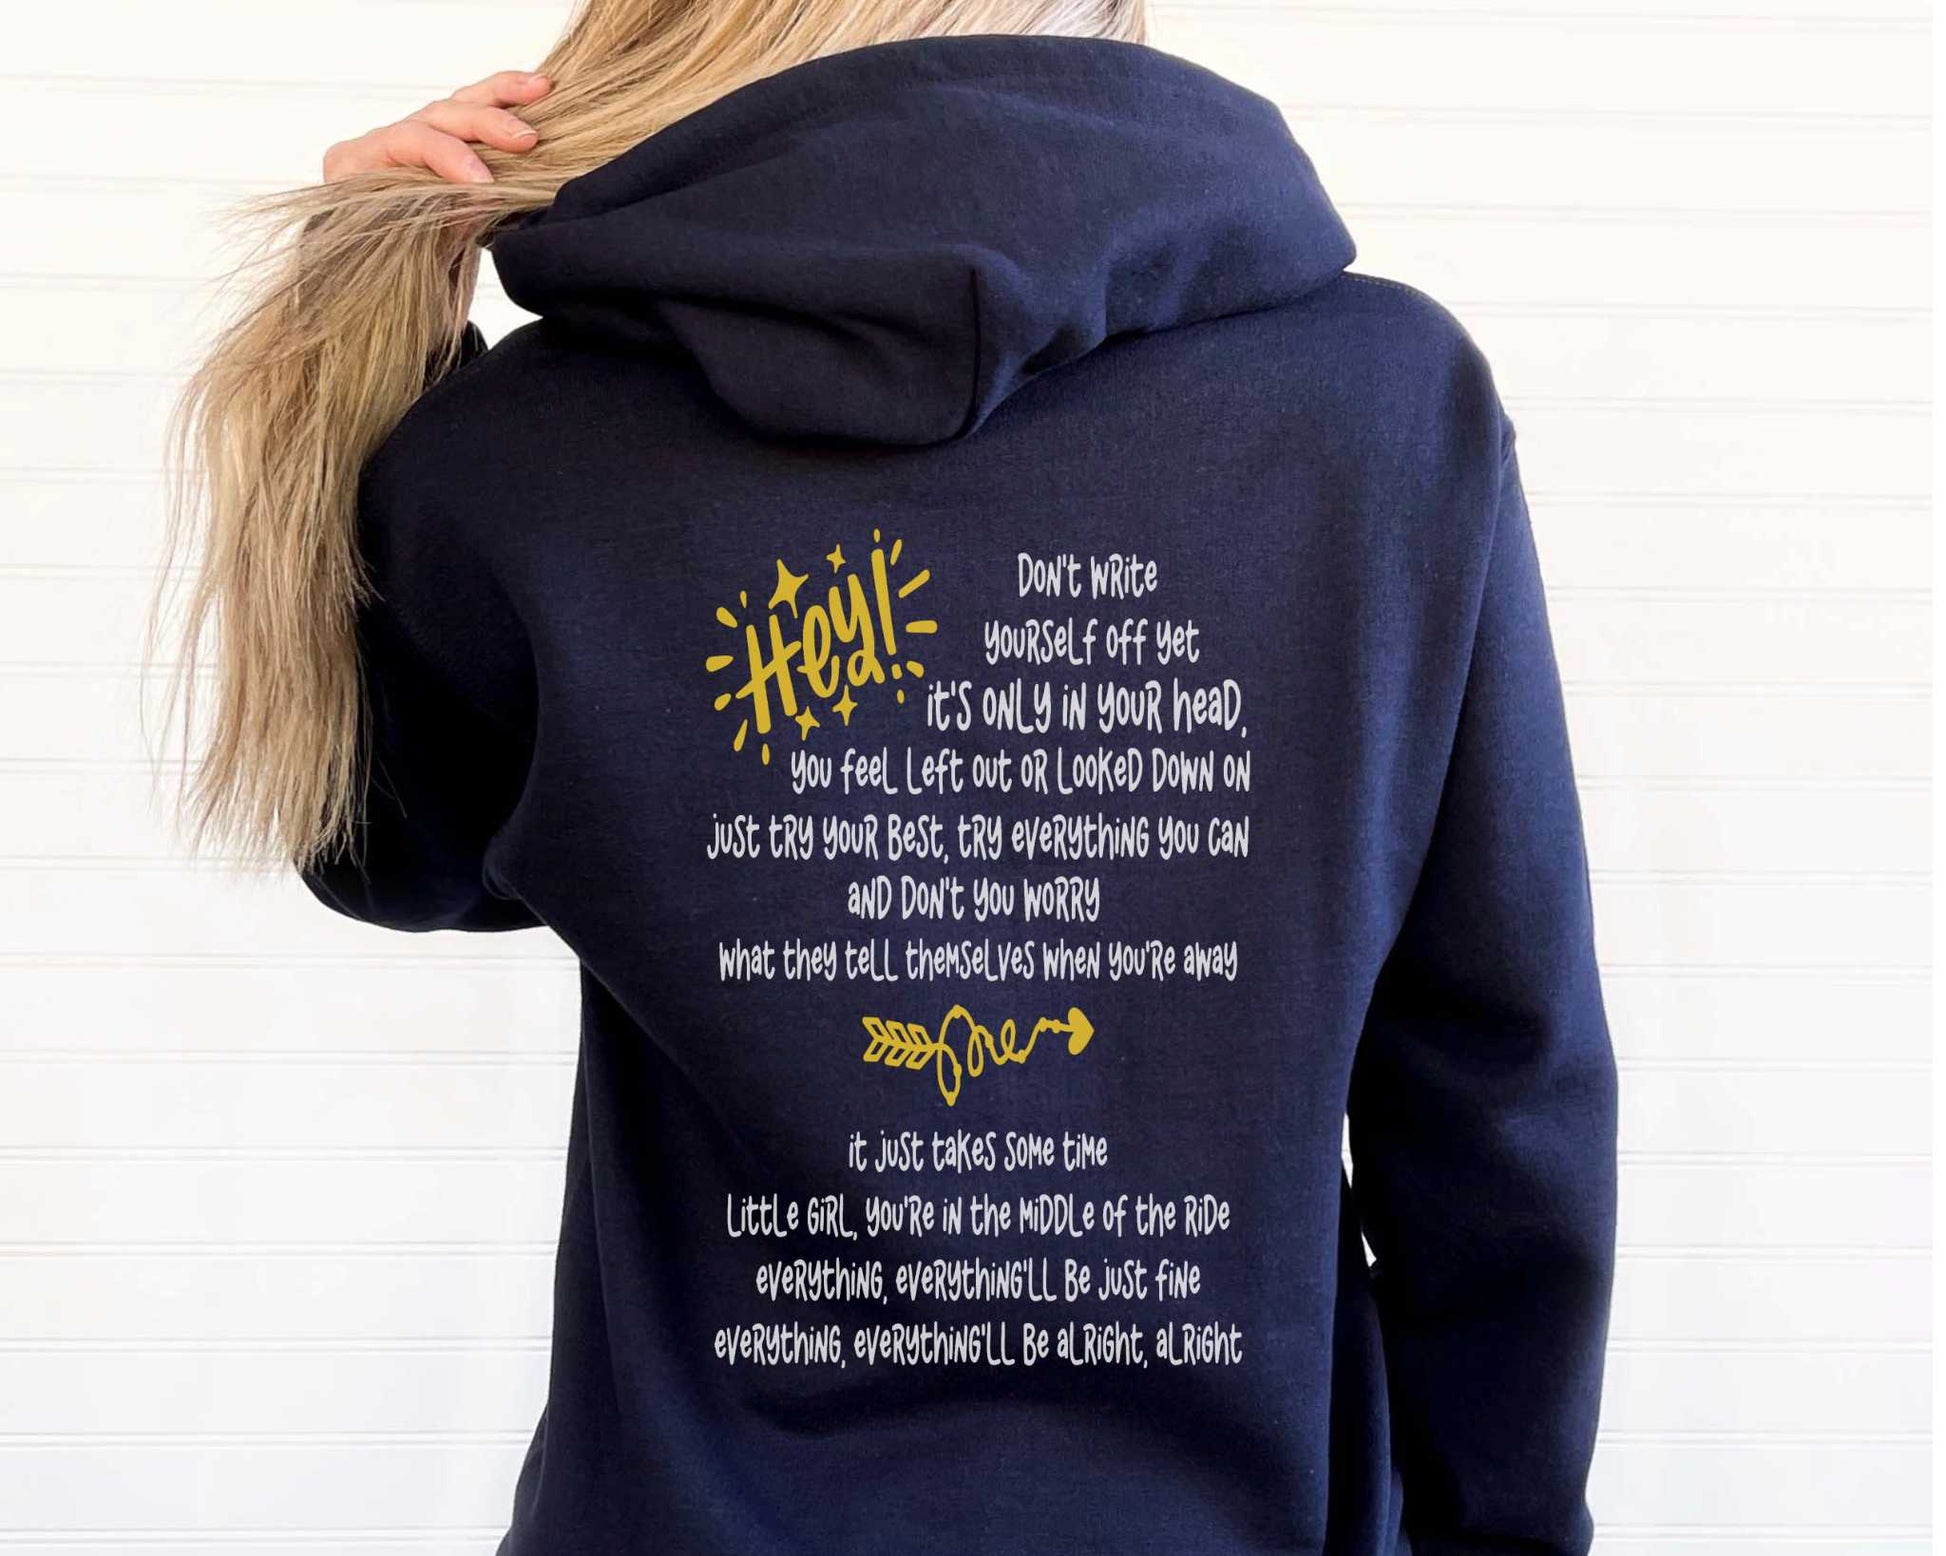 Jimmy Eat World "The Middle" Emo Kid Hoodie in Navy